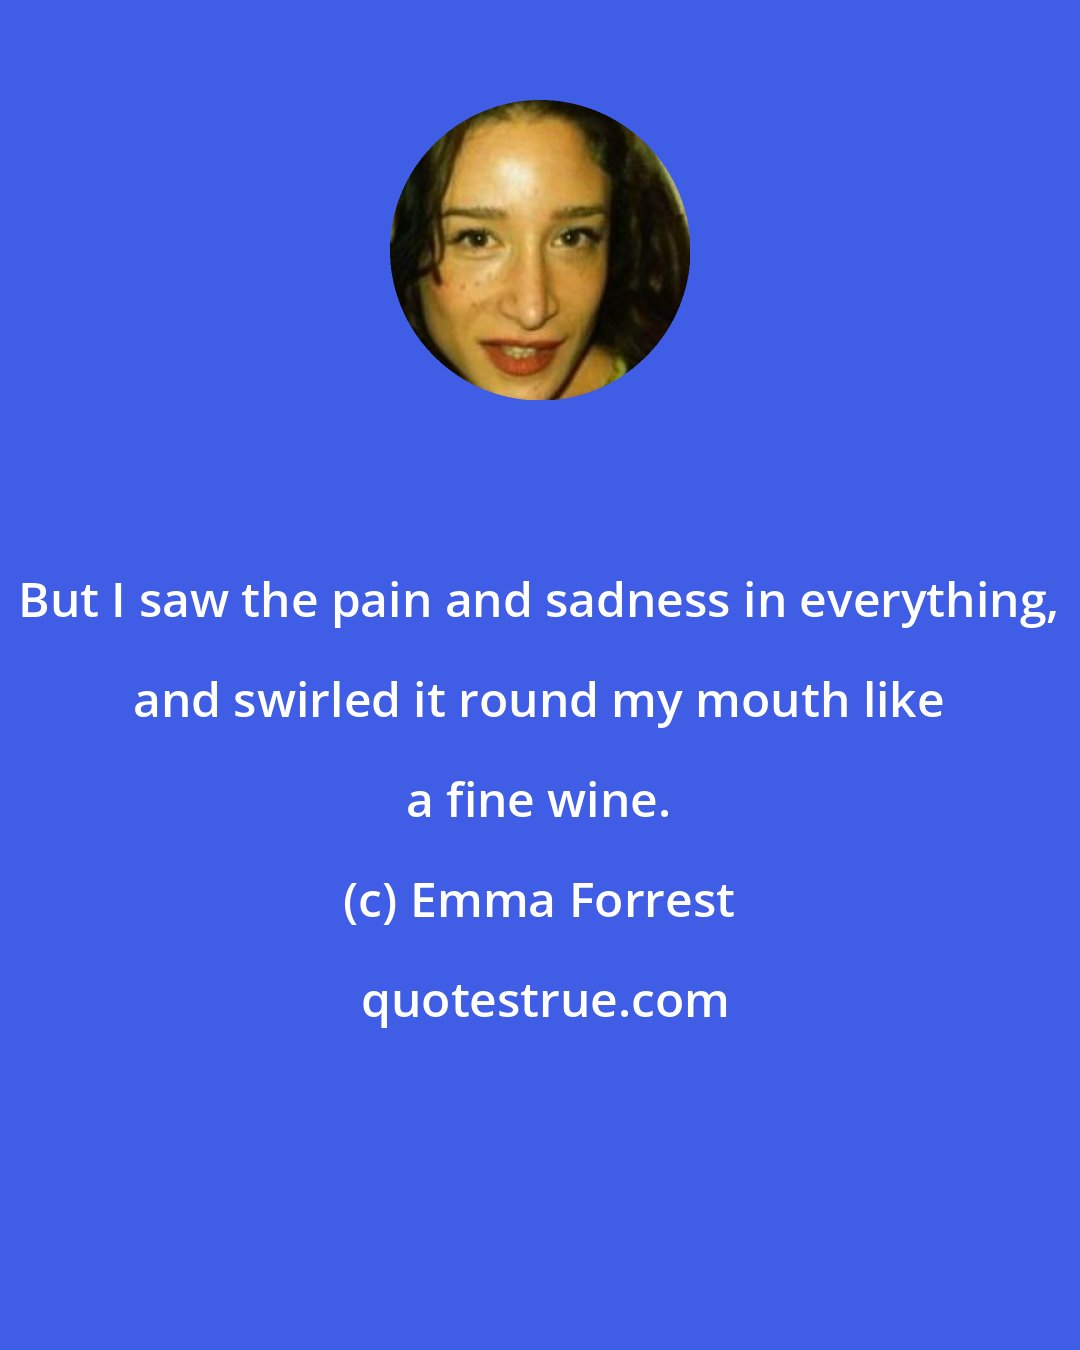 Emma Forrest: But I saw the pain and sadness in everything, and swirled it round my mouth like a fine wine.